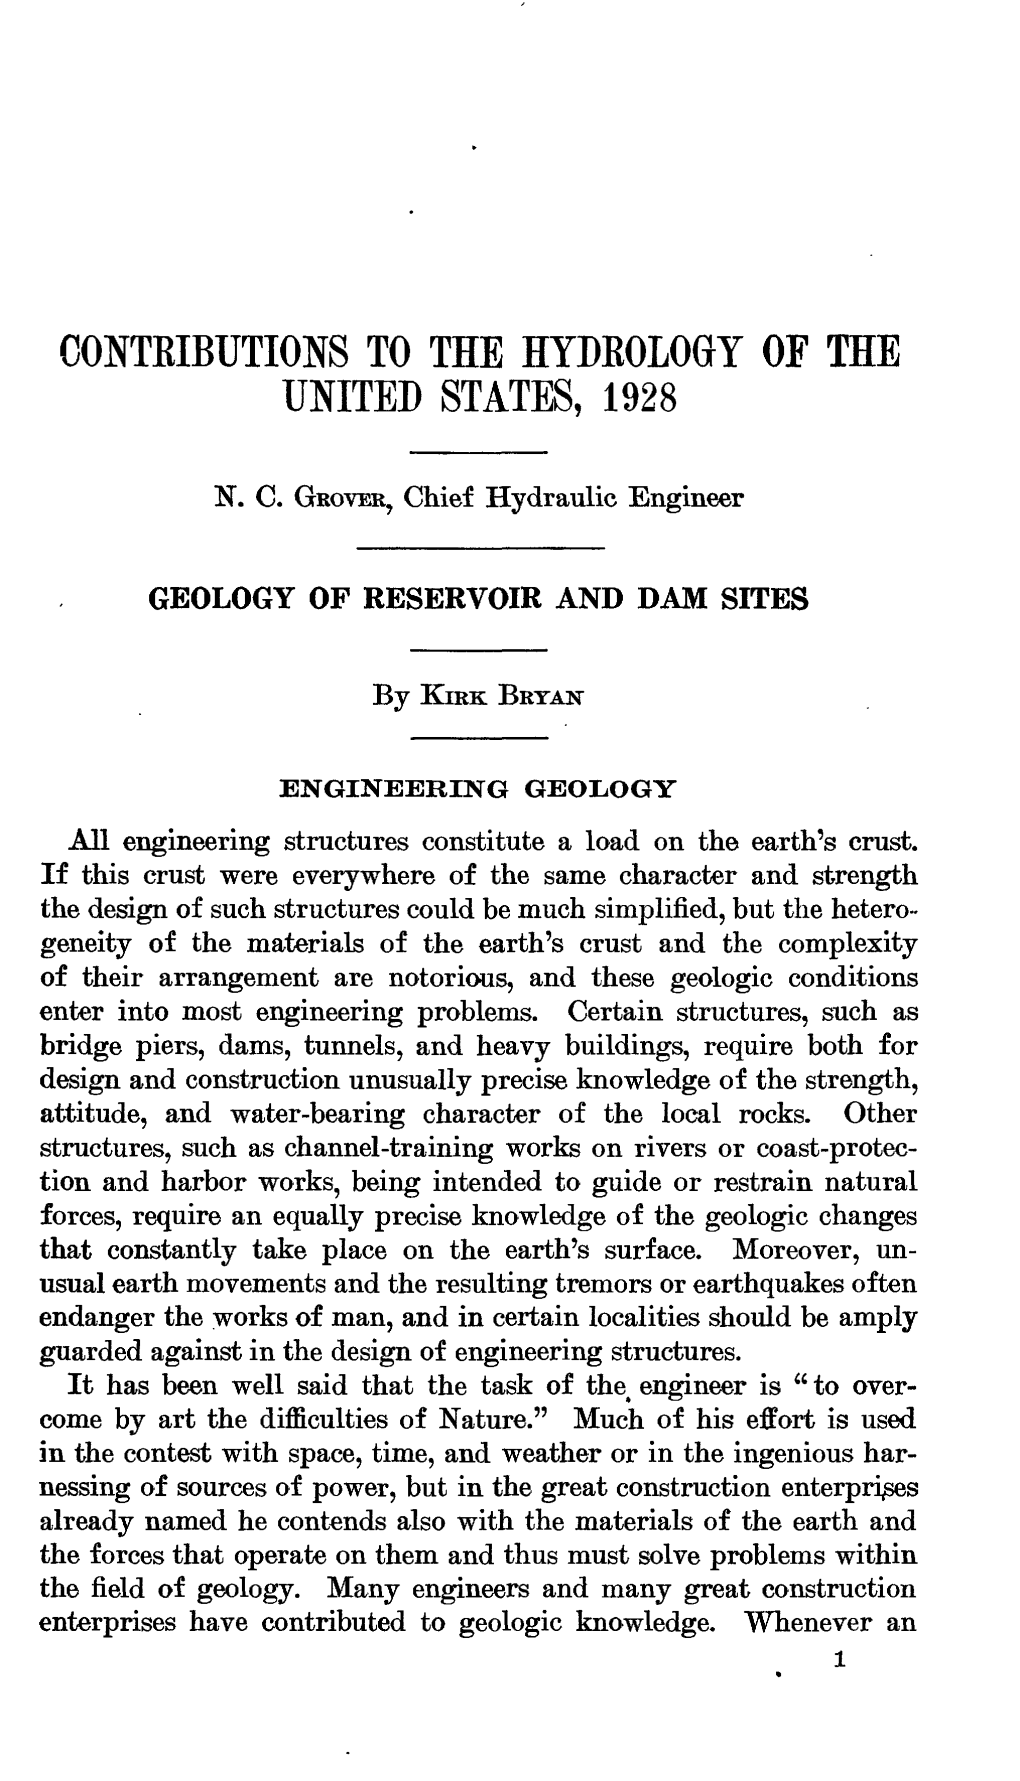 Geology of Reservoir and Dam Sites, with a Report on the Owyhee